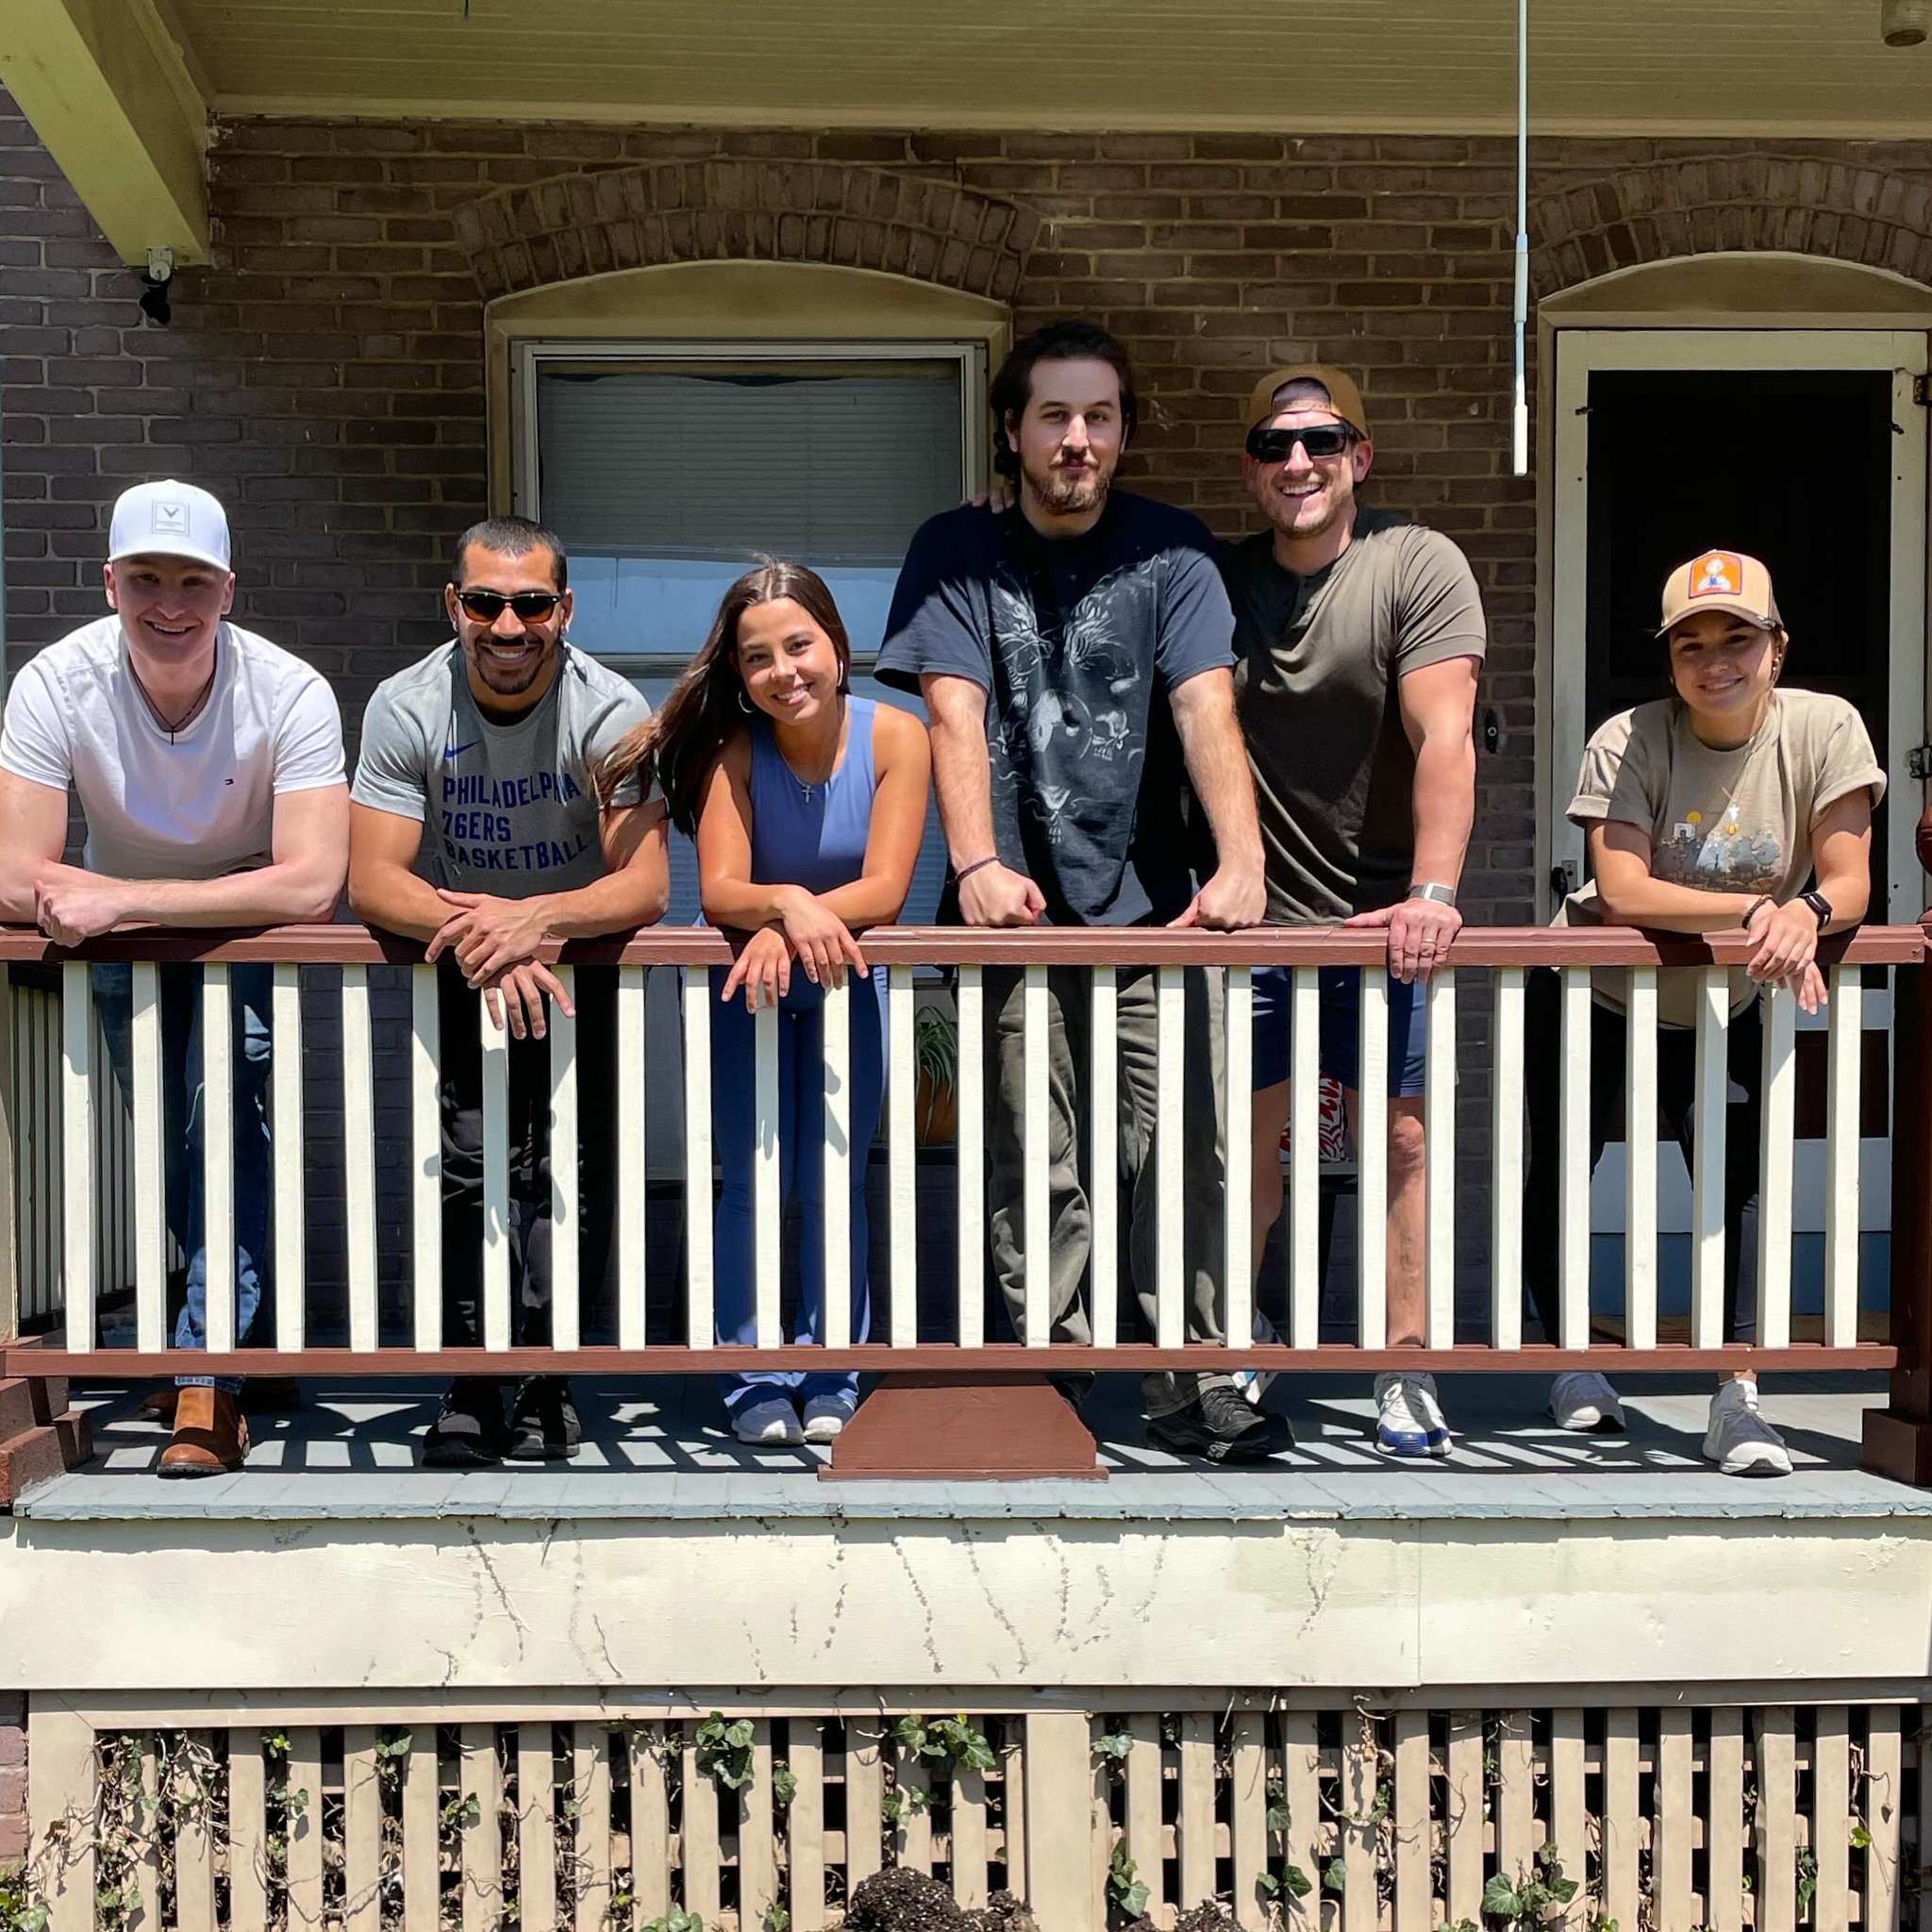 Thanks to this hard working group - the first install of 2024 is in the books! 

#volunteer #causes #donate #change #nonprofit #dogood #socialgood #donatedontdump #helponeanother #dogoodfeelgood #love #giveback #instagood #donations